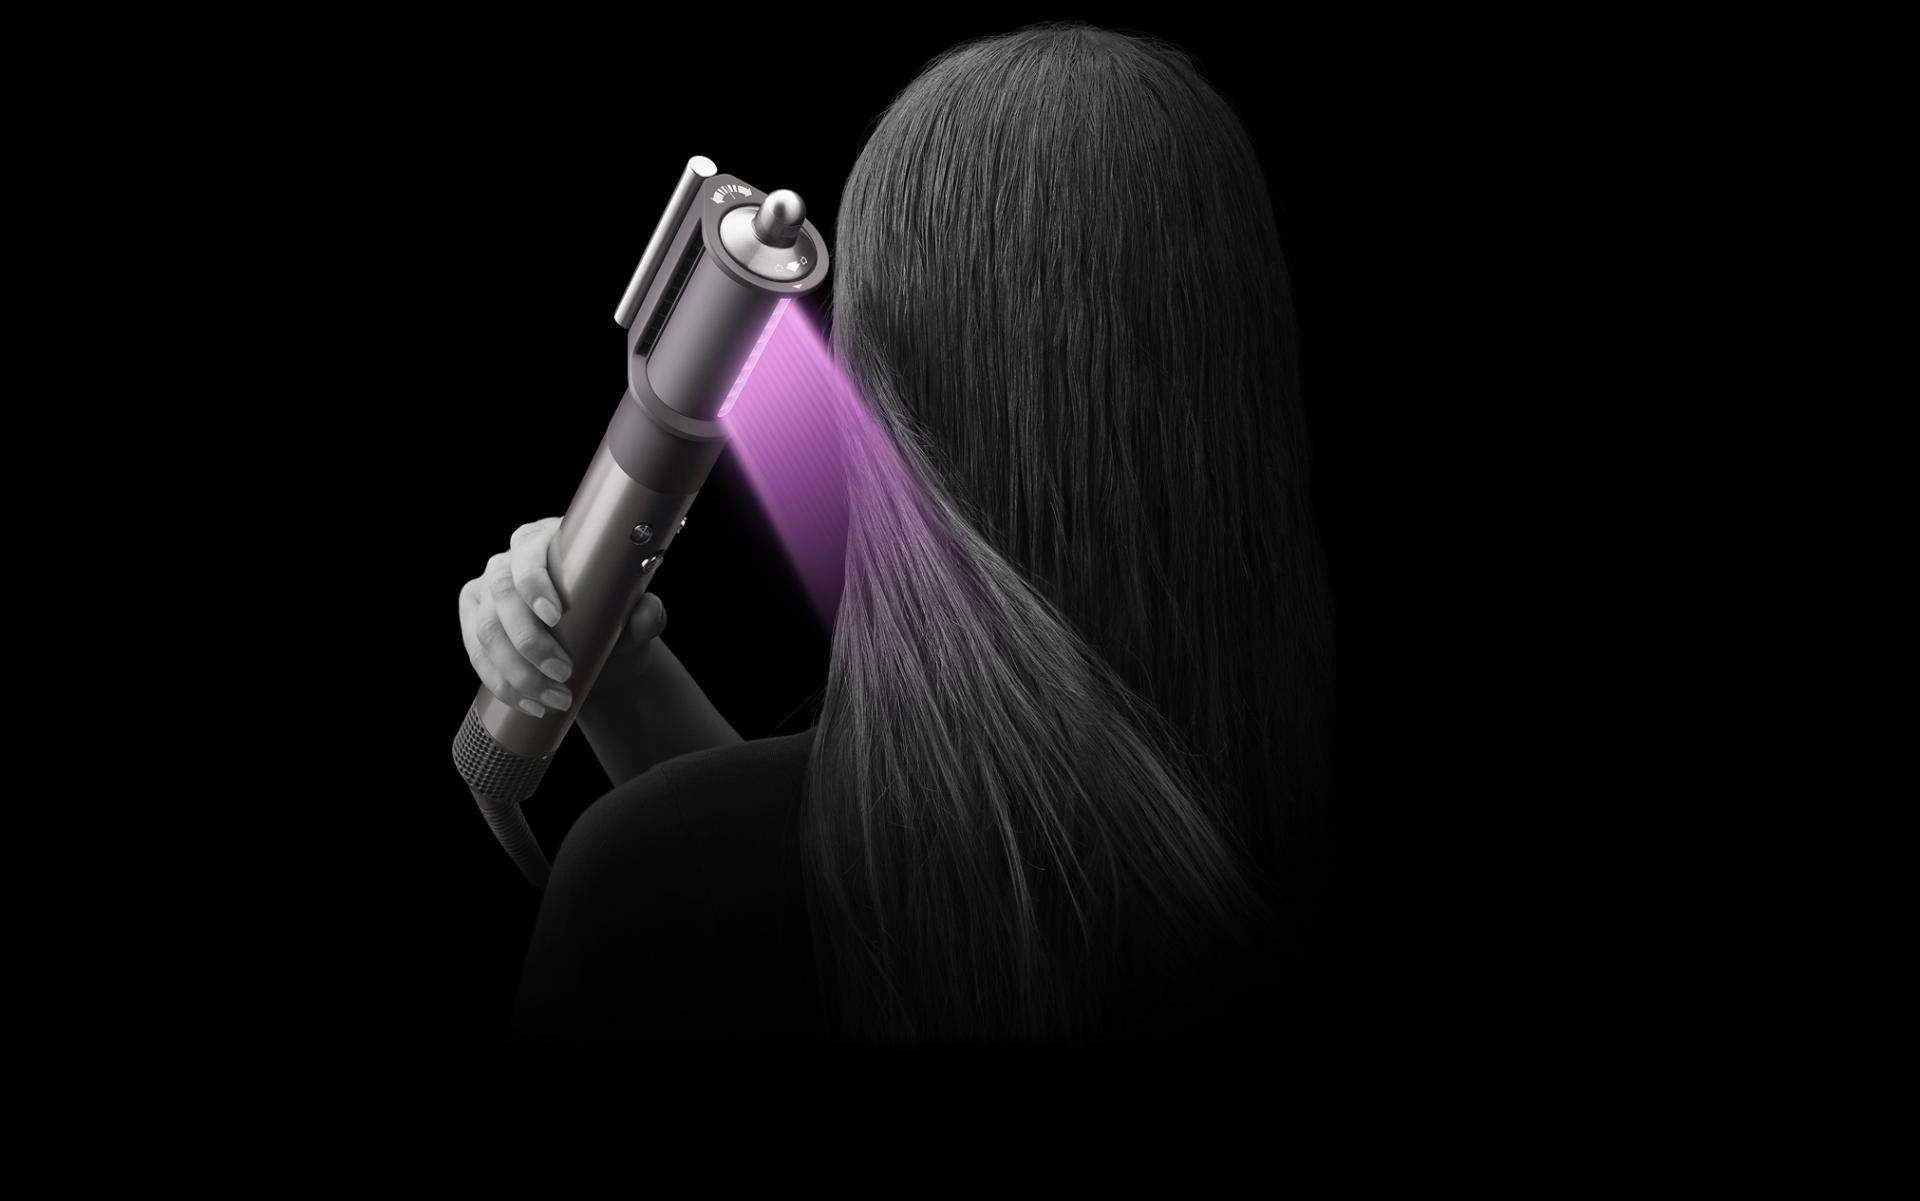 Model using Coanda smoothing dryer attachment in Drying mode